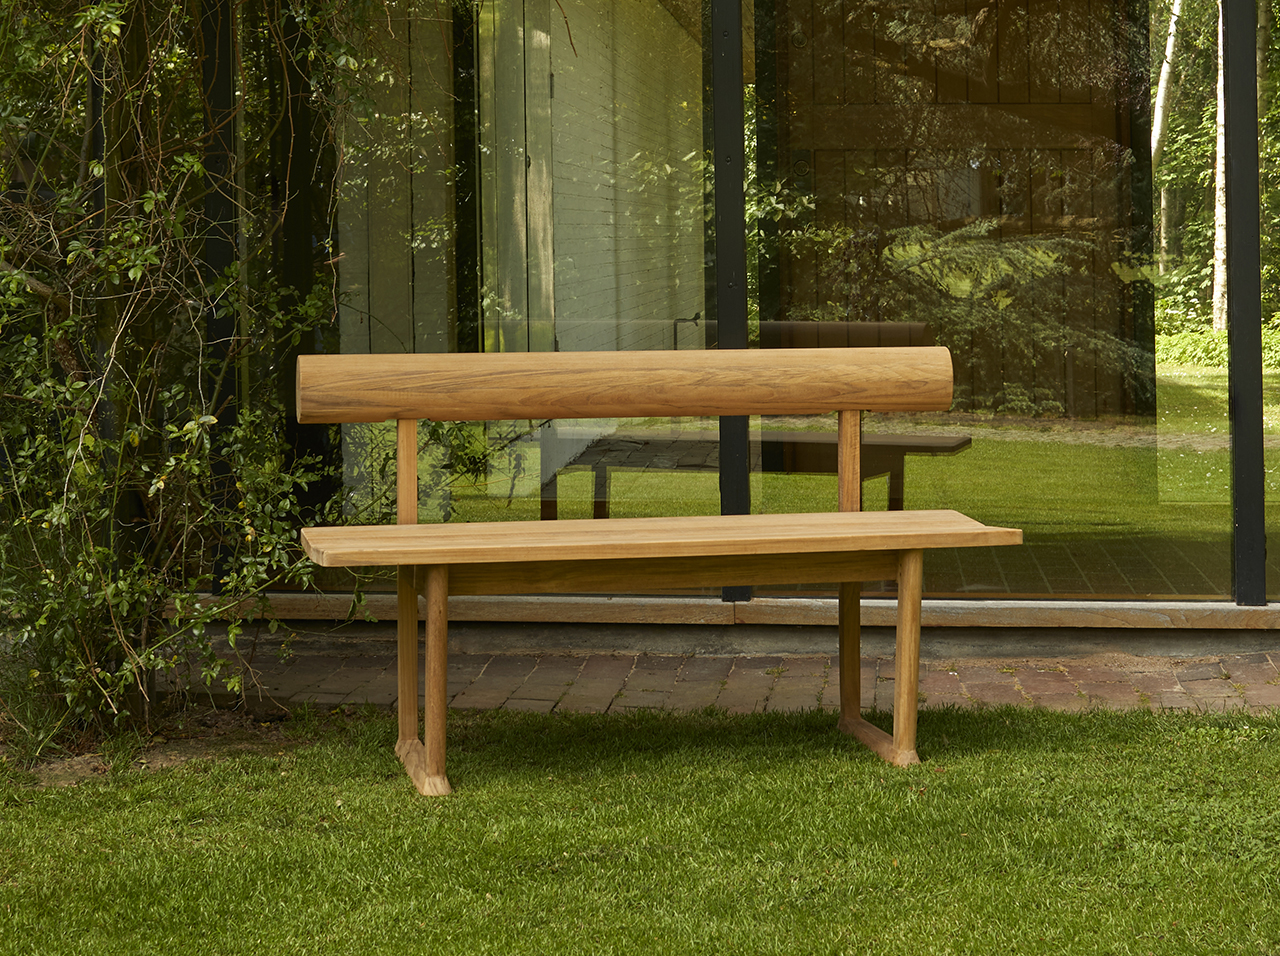 The Banco Bench Hopes to Enhance Your Experience With Nature